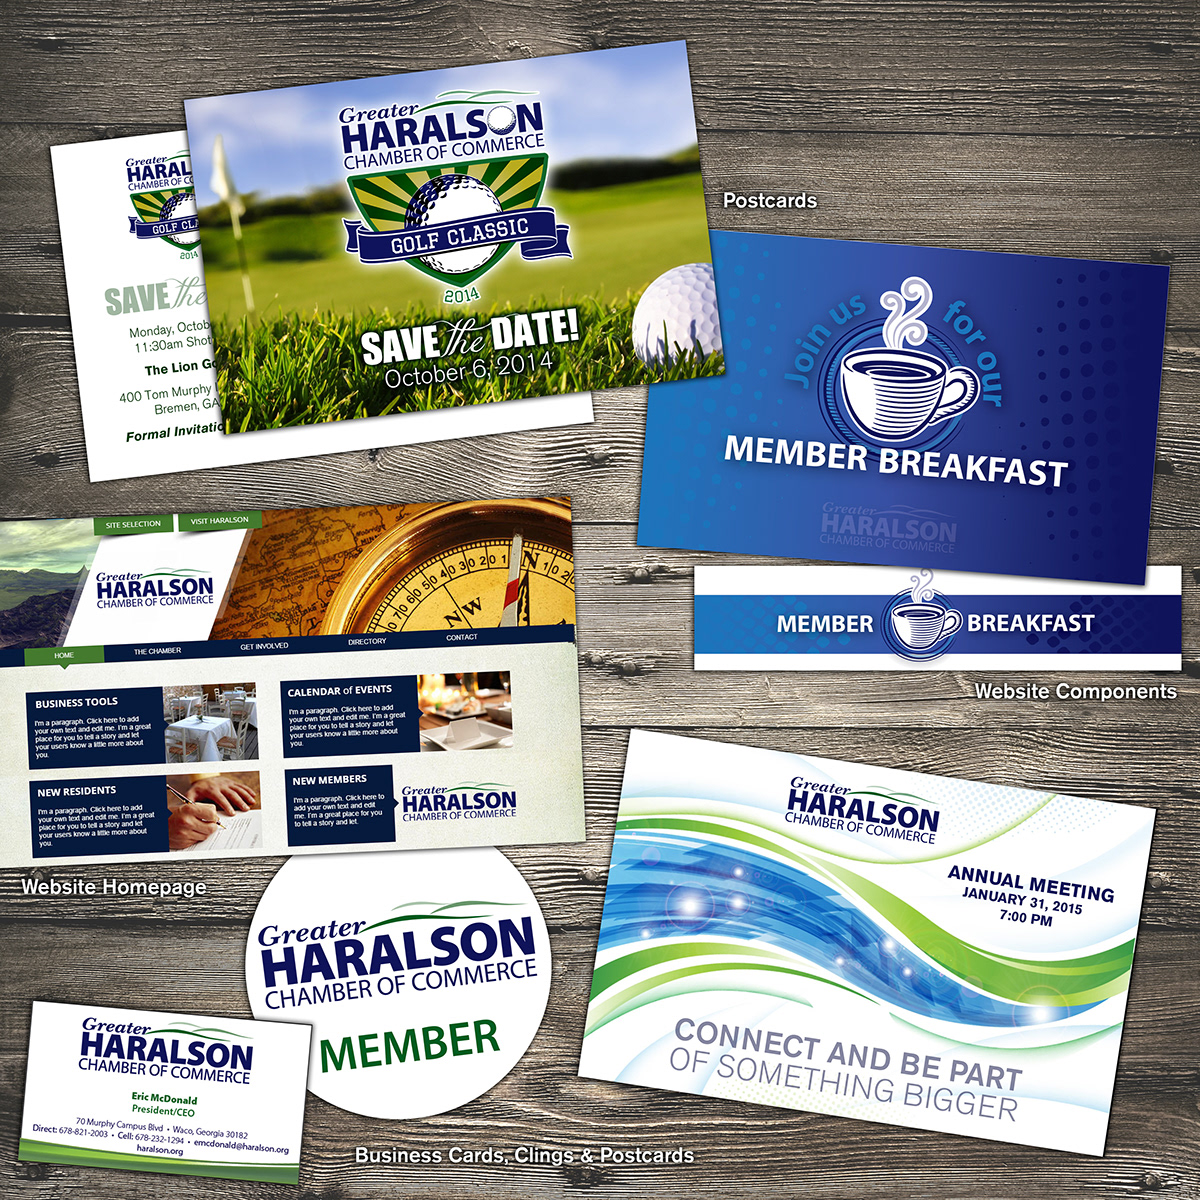 Greater Haralson Chamber Business Cards post cards site Layout print logo visual guide